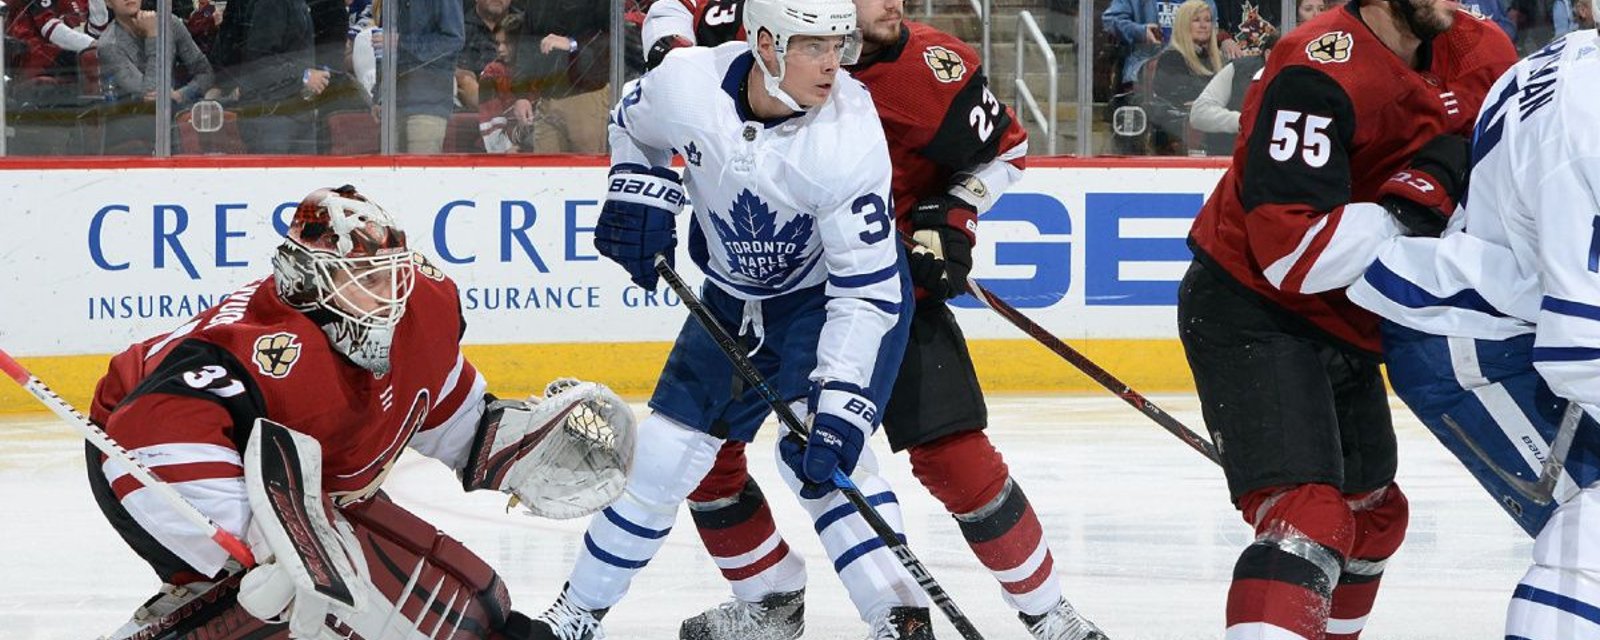 Matthews offer sheet: Western Conference club to come in on a one-year max deal $16 million!